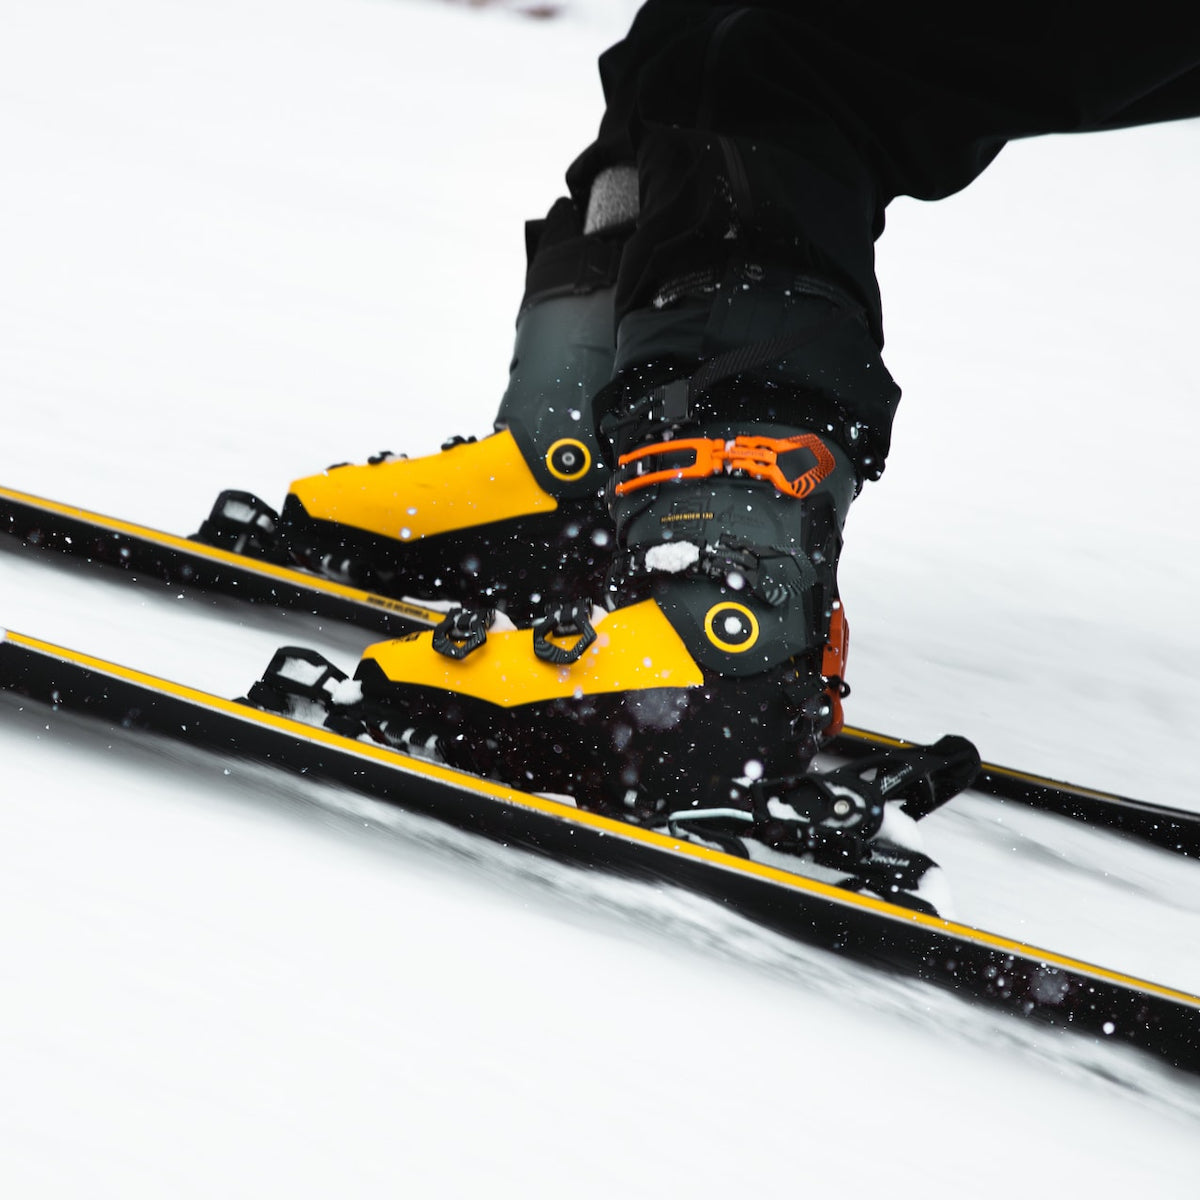 closeup photo of a person knee-down as they slow to a stop, focusing on the yellow pair of boots and skis.